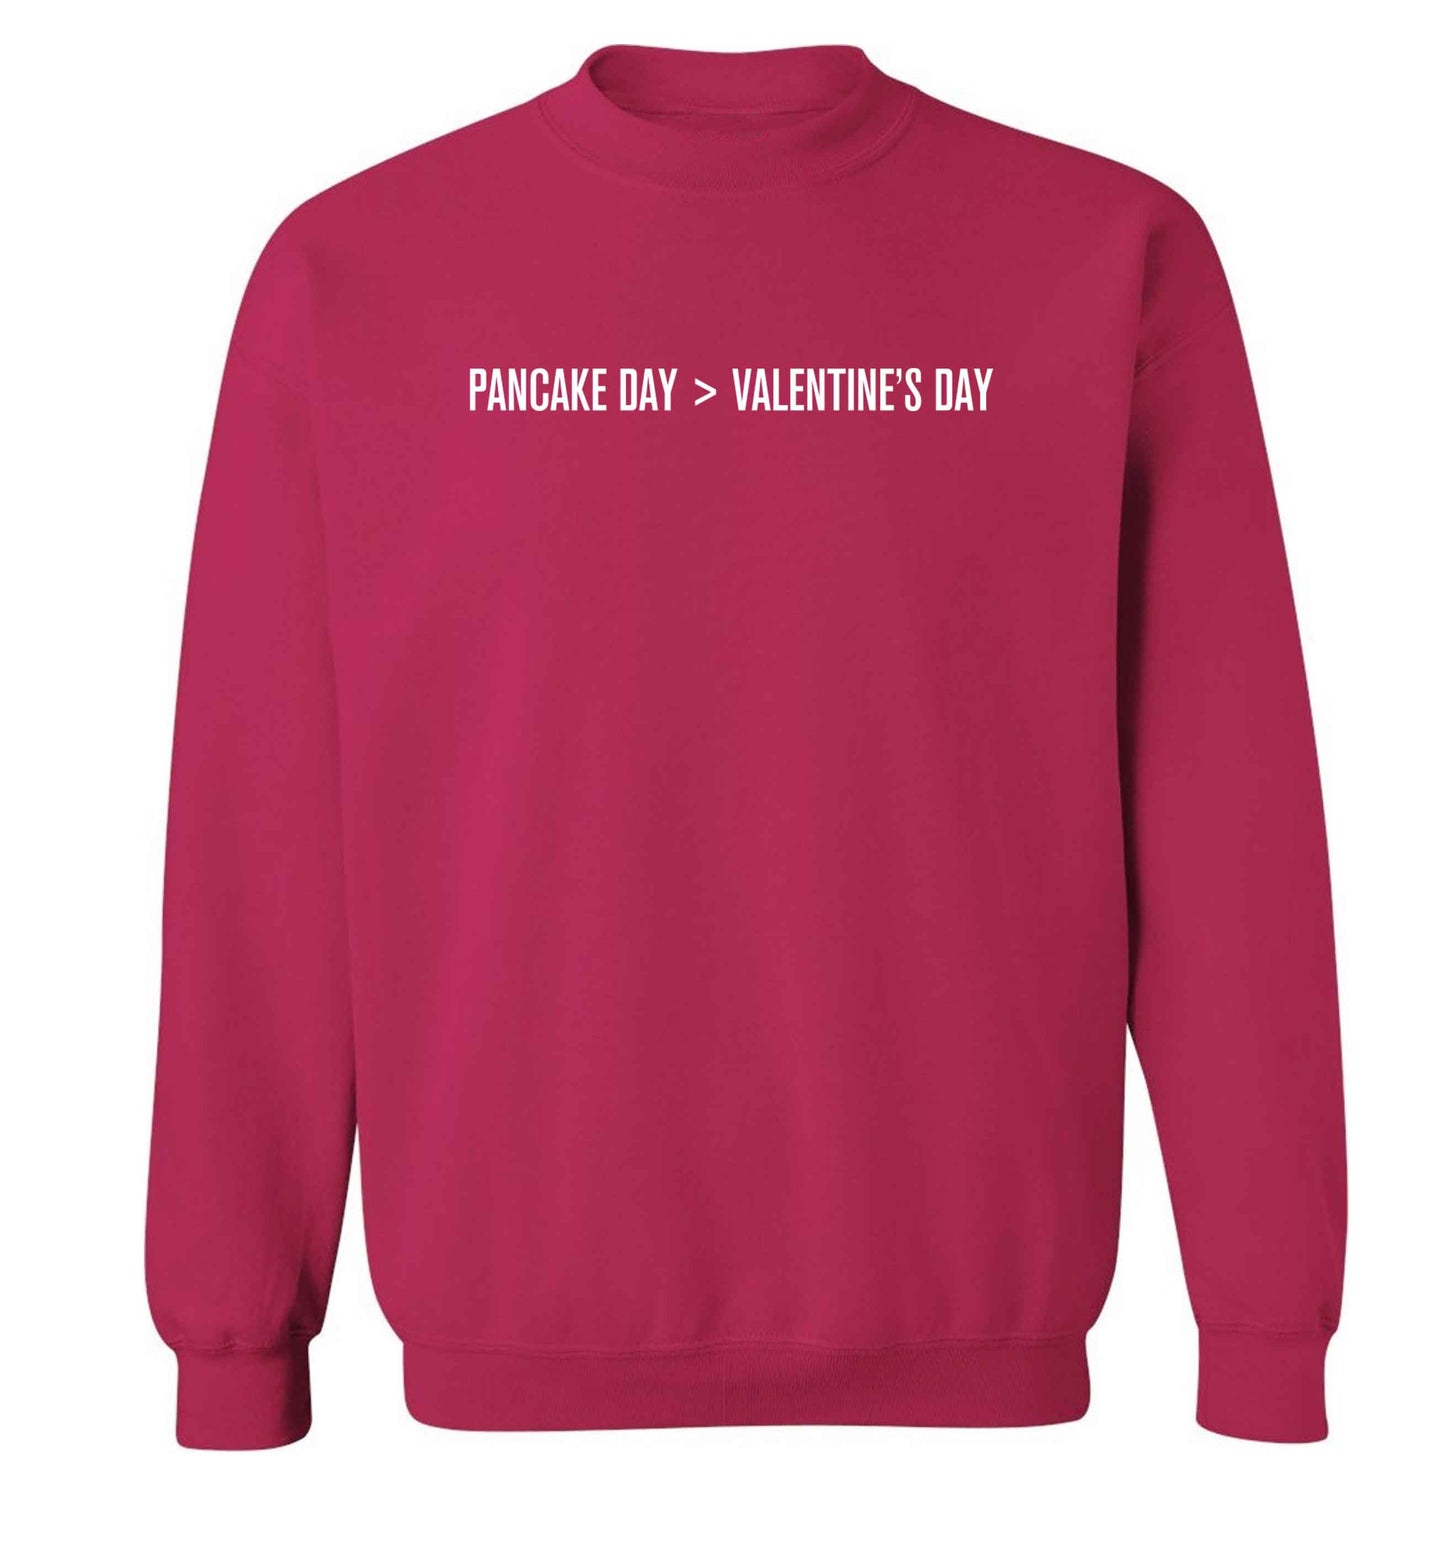 Pancake day > valentines day adult's unisex pink sweater 2XL